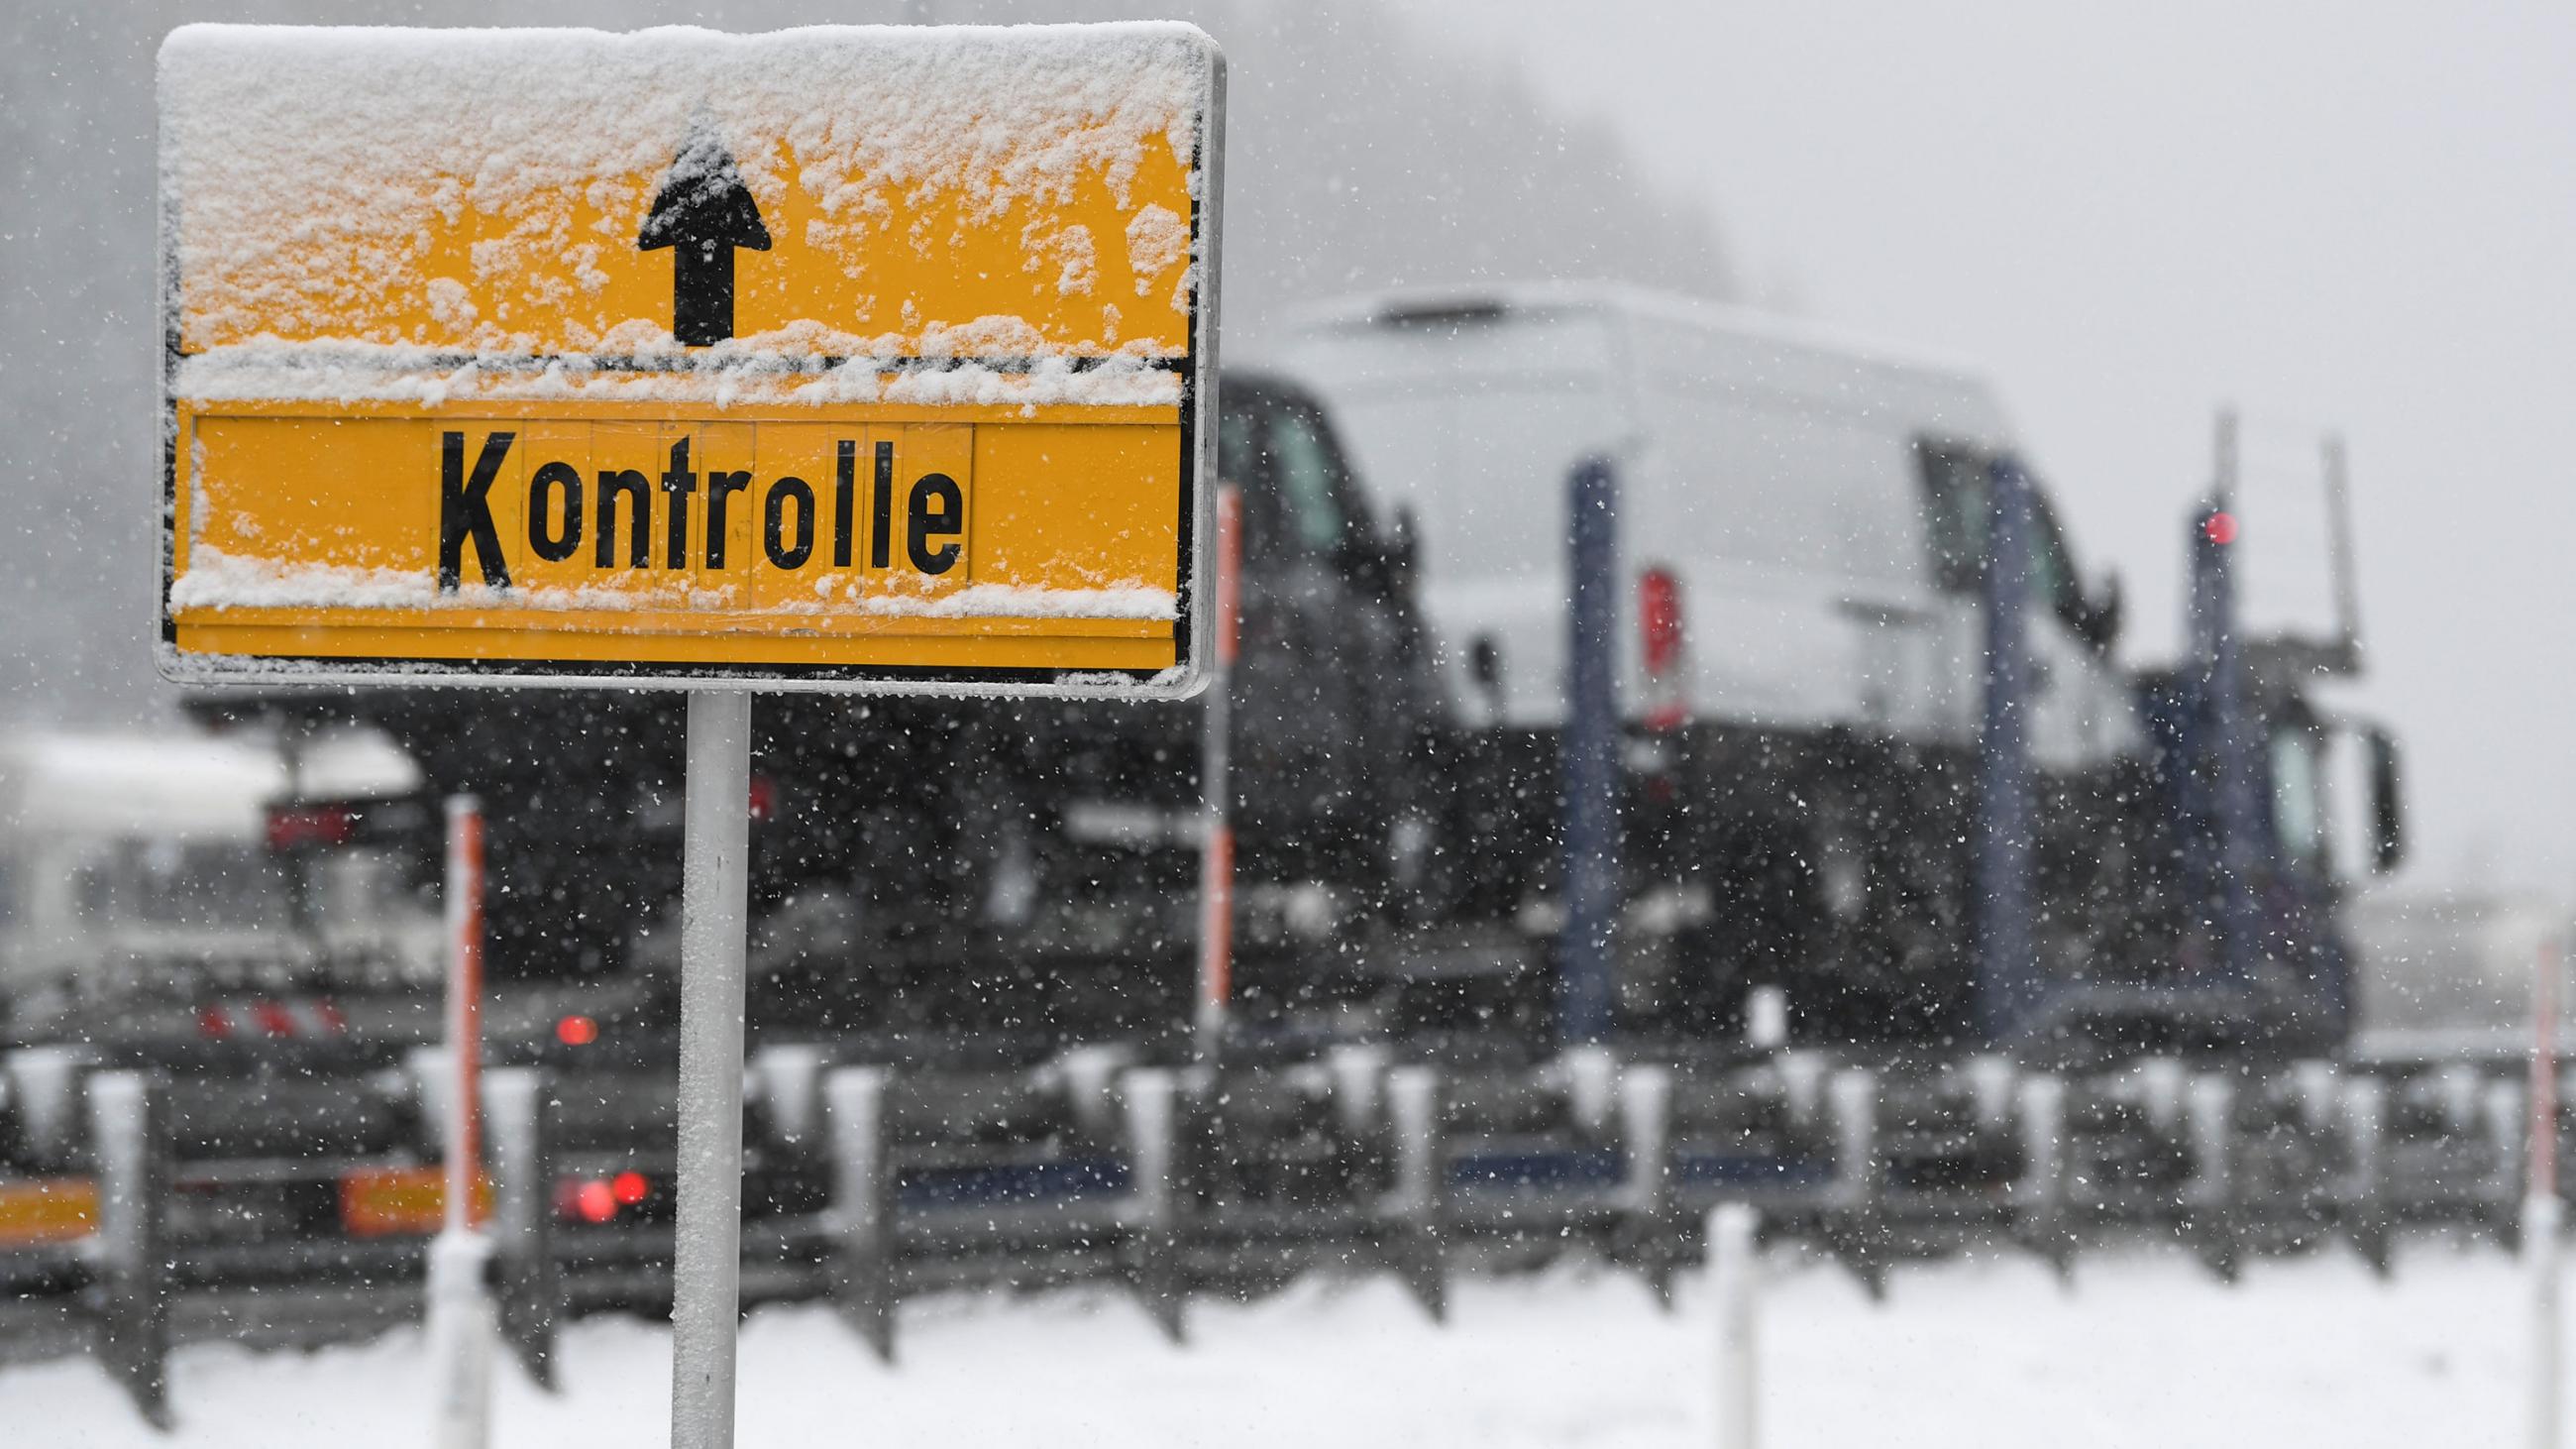 Picture shows a yellow sign and trucks waiting at the checkpoint. Snow is falling and partially obscures the sign. 